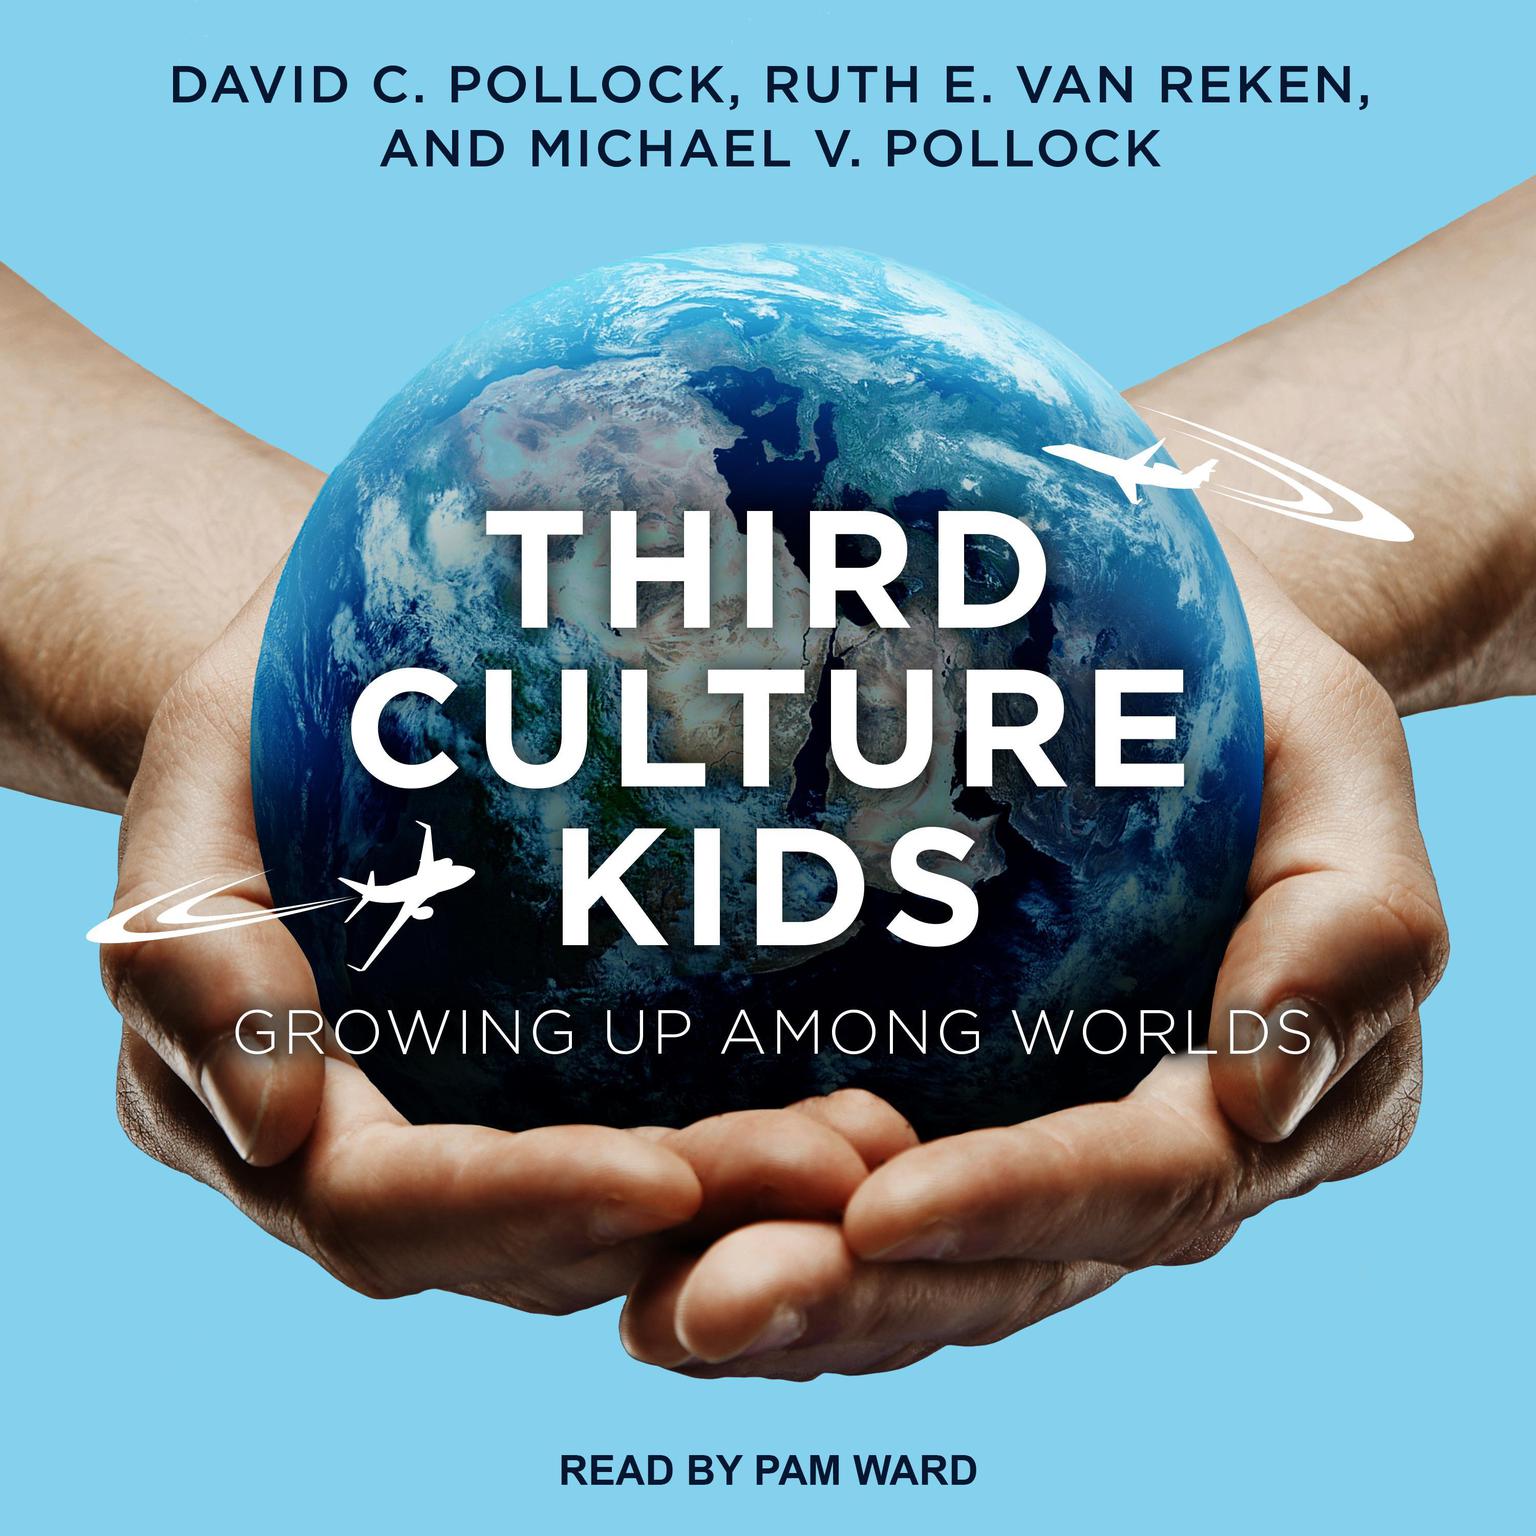 Third Culture Kids: Growing Up Among Worlds, Third Edition Audiobook, by David C. Pollock